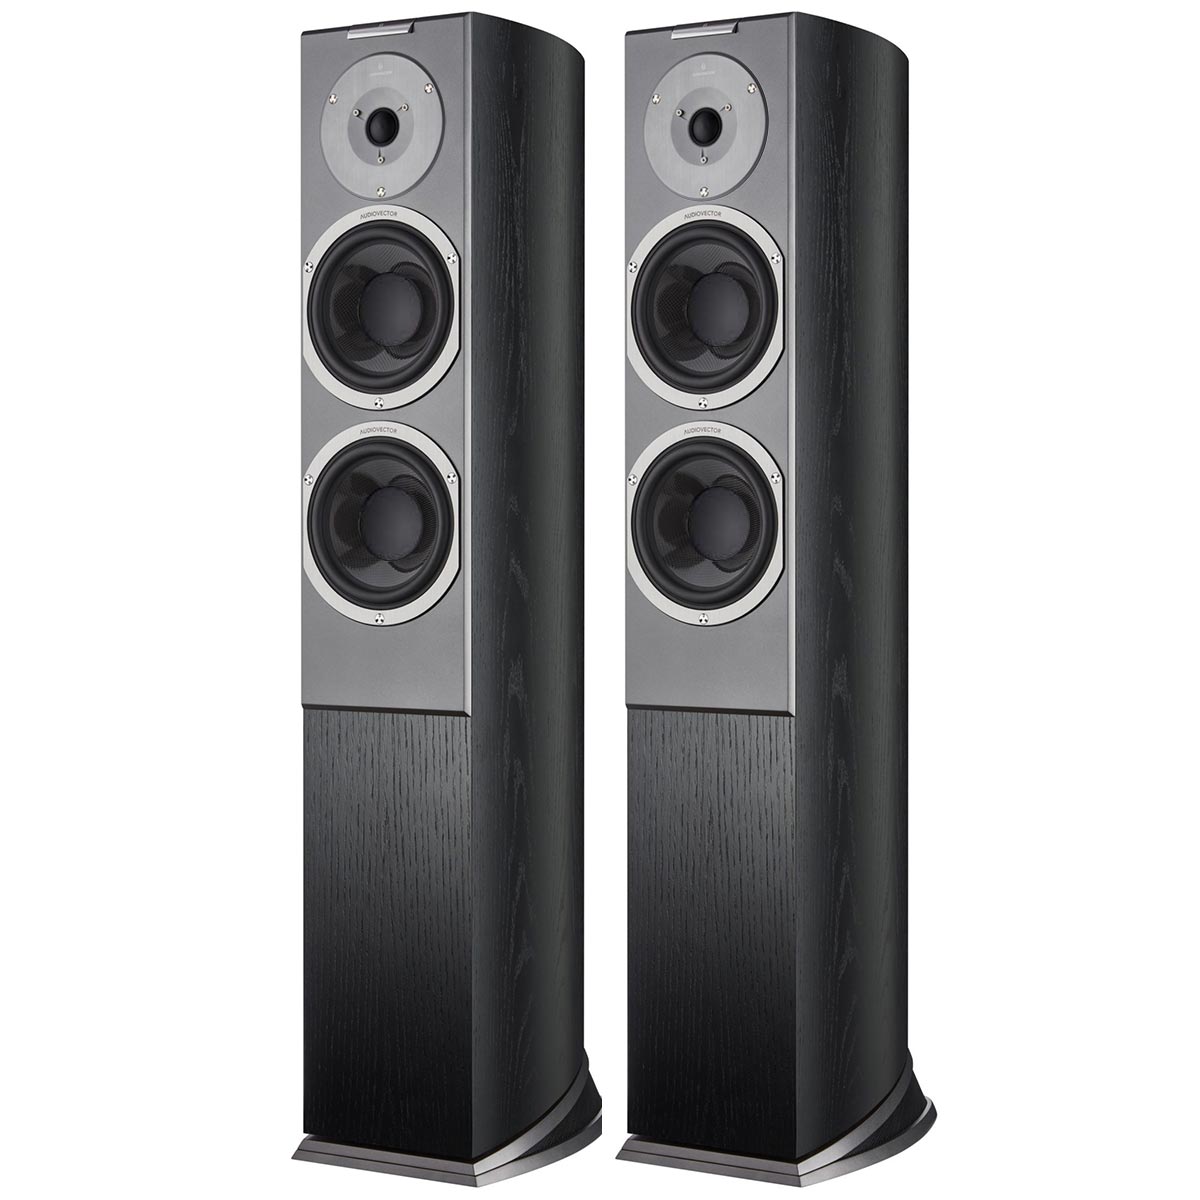 Напольная акустика Audiovector R 3 Signature Black Stained Ash напольная акустика audiovector qr 5 white silk